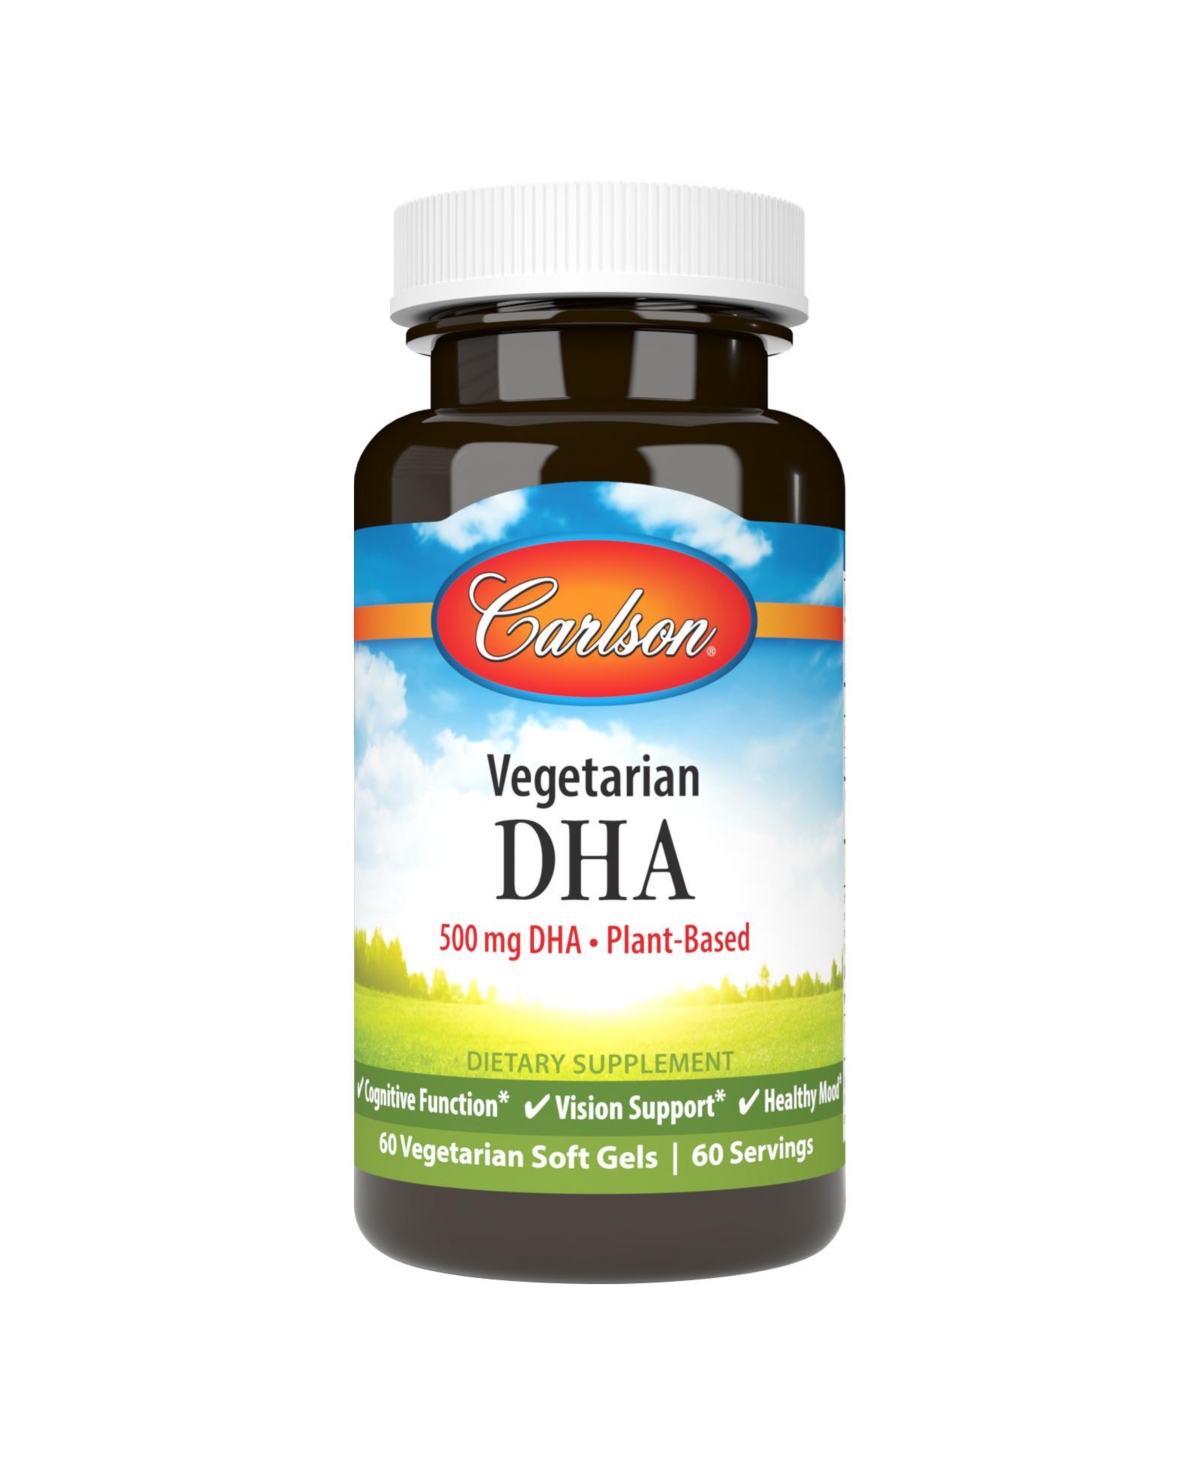 Carlson - Vegetarian Dha, 500 mg Dha, Plant Based, Sustainably Sourced From Algae, 60 Softgels